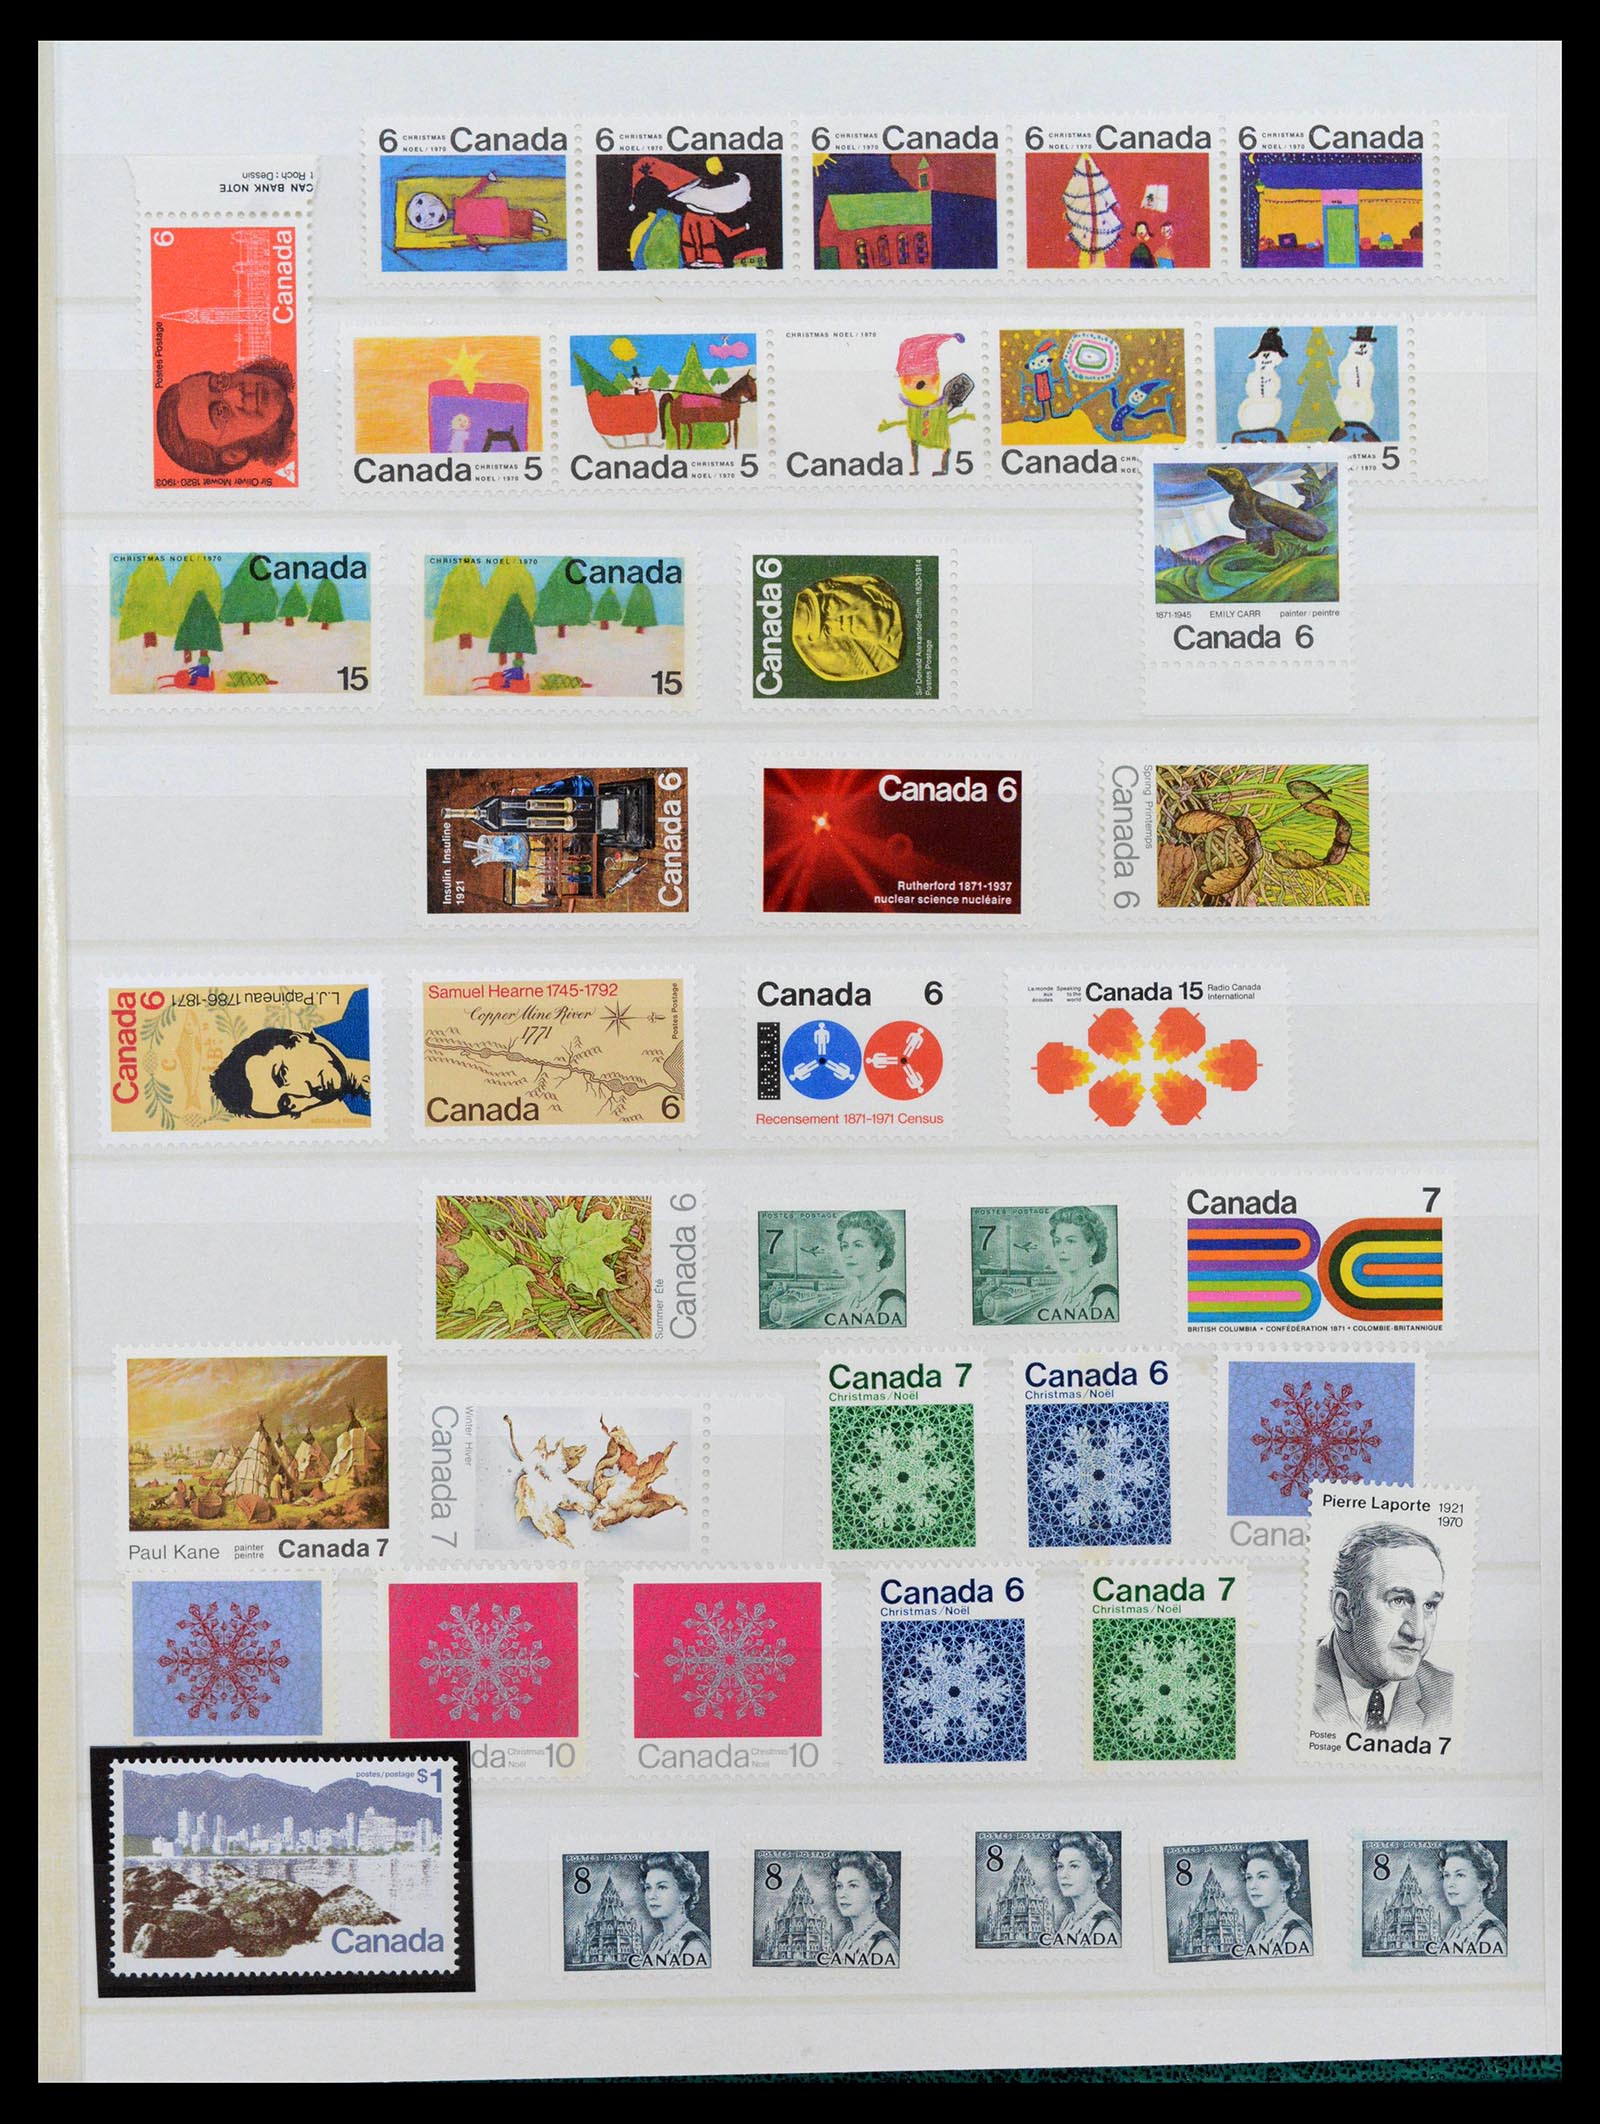 39199 0034 - Stamp collection 39199 Canada and provinces 1851-1970.